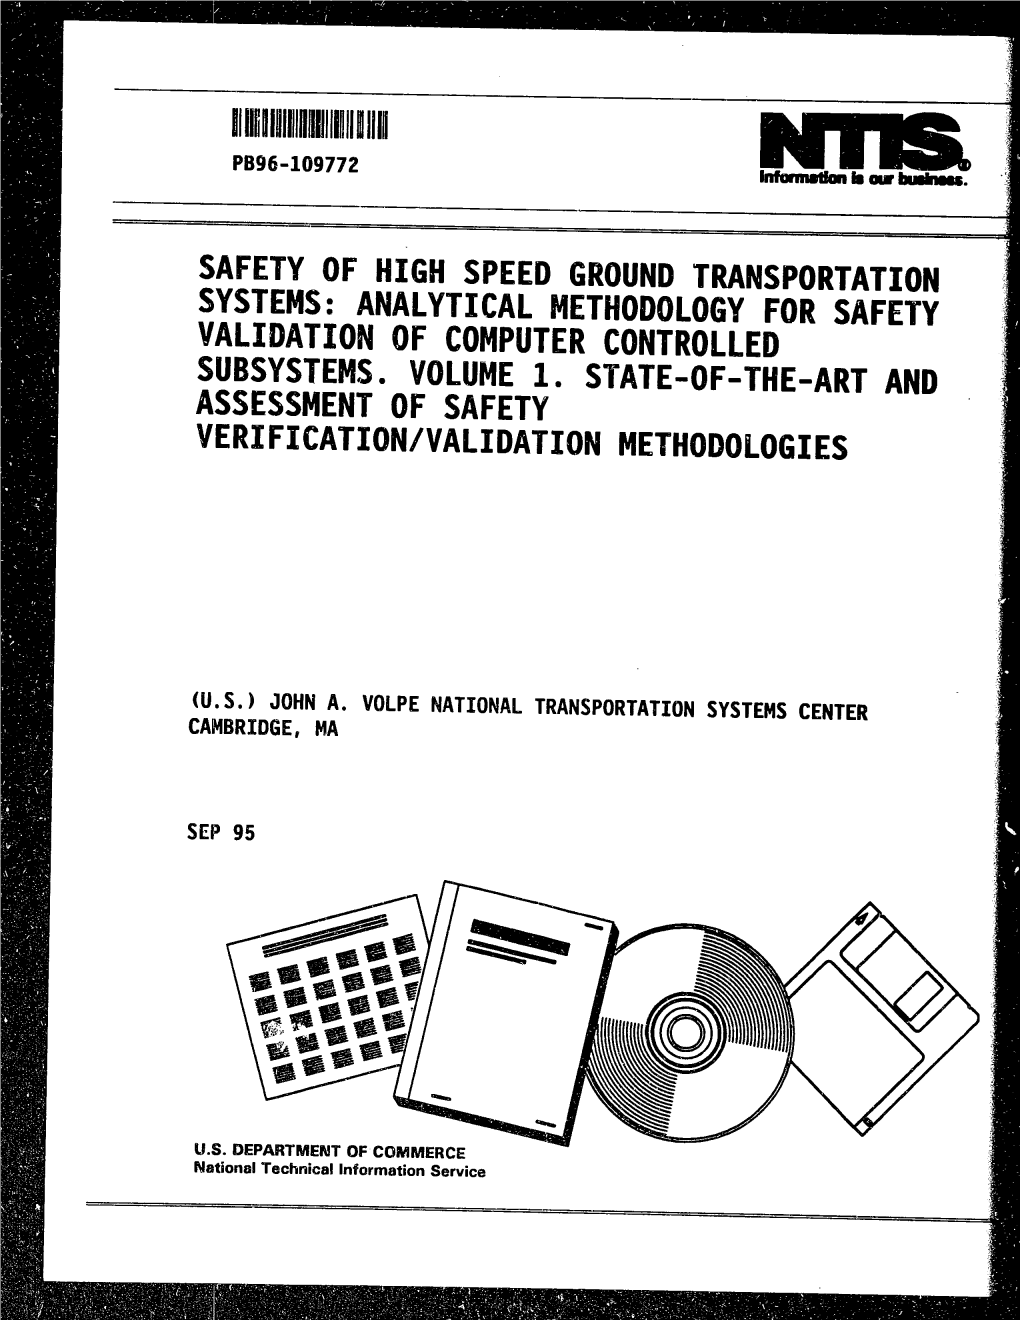 Safety of High Speed Ground Transportation Systems: Analytical Methodology for Safety Validation of Computer Controlled Subsystems